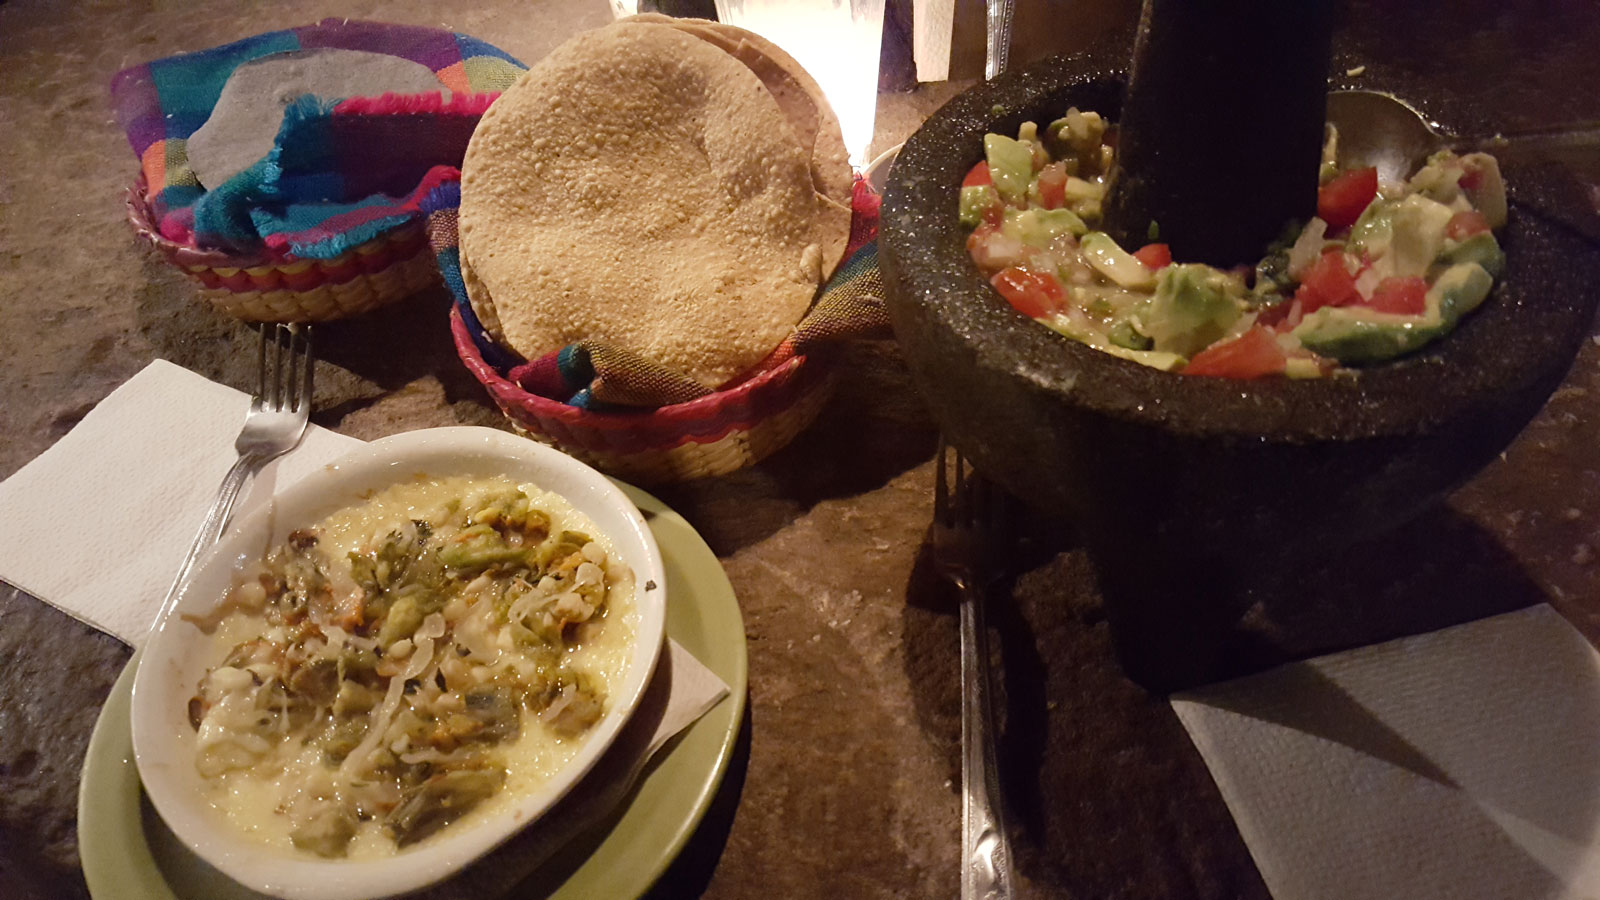 Late night dishes of Queso Fundido y Guacamole